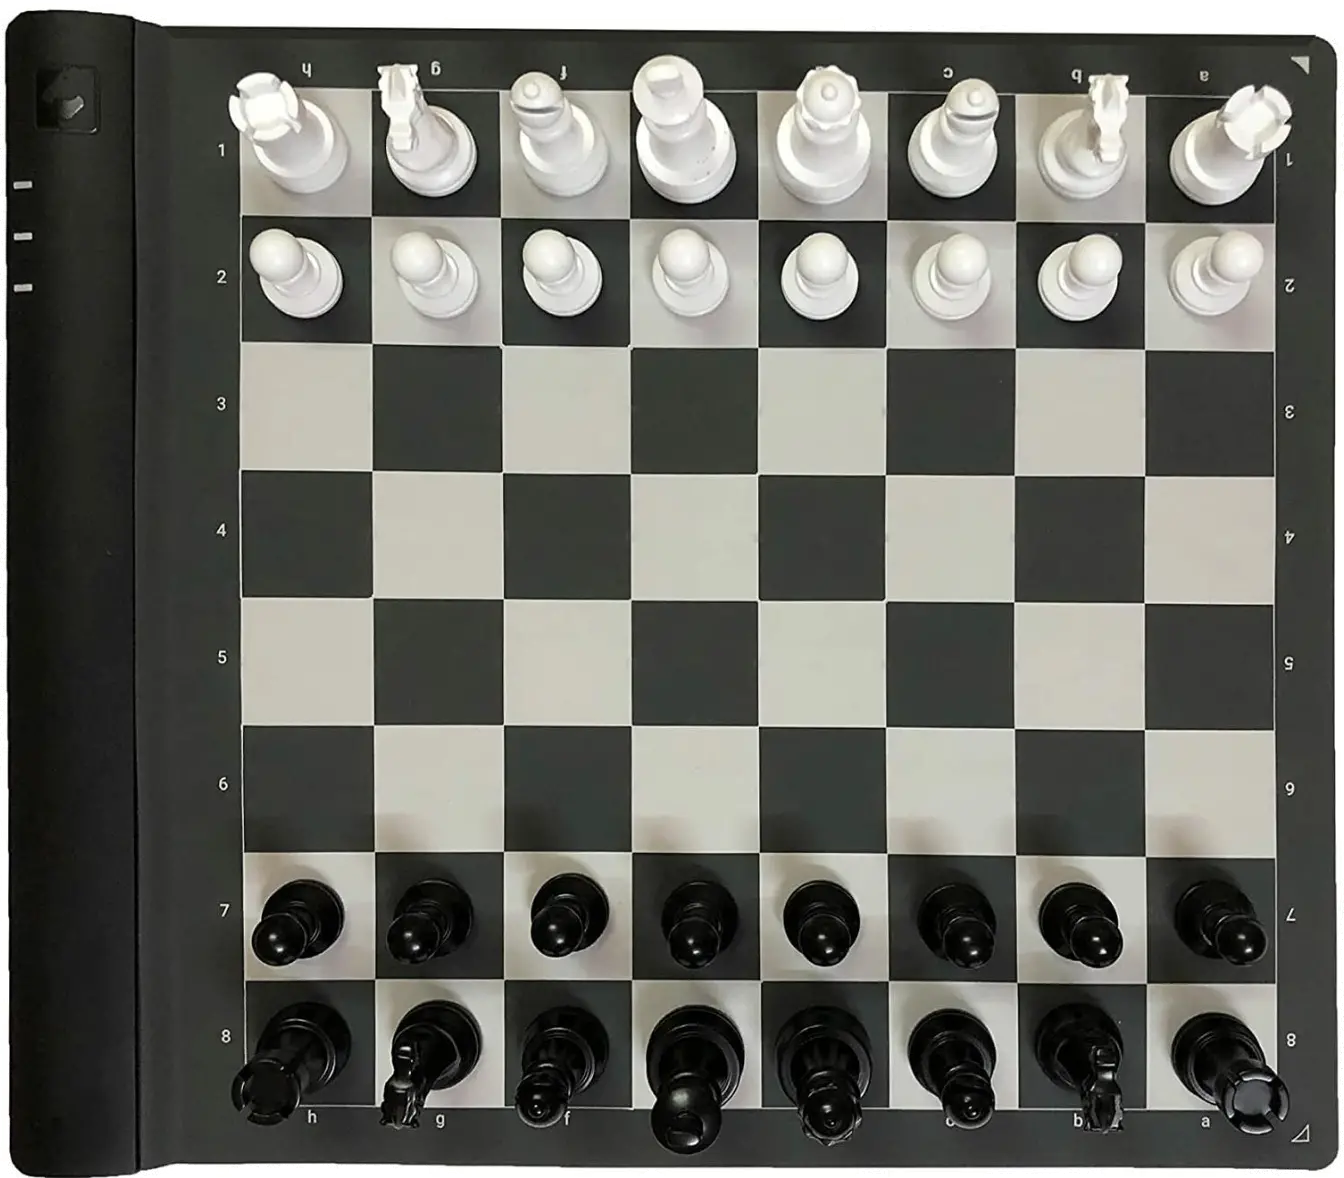  Square Off Pro Electronic Chess Board for Adults & Kids, AI-Powered & Digital, Play Against AI or Friends, Portable & Rollable Computer  Chess Board